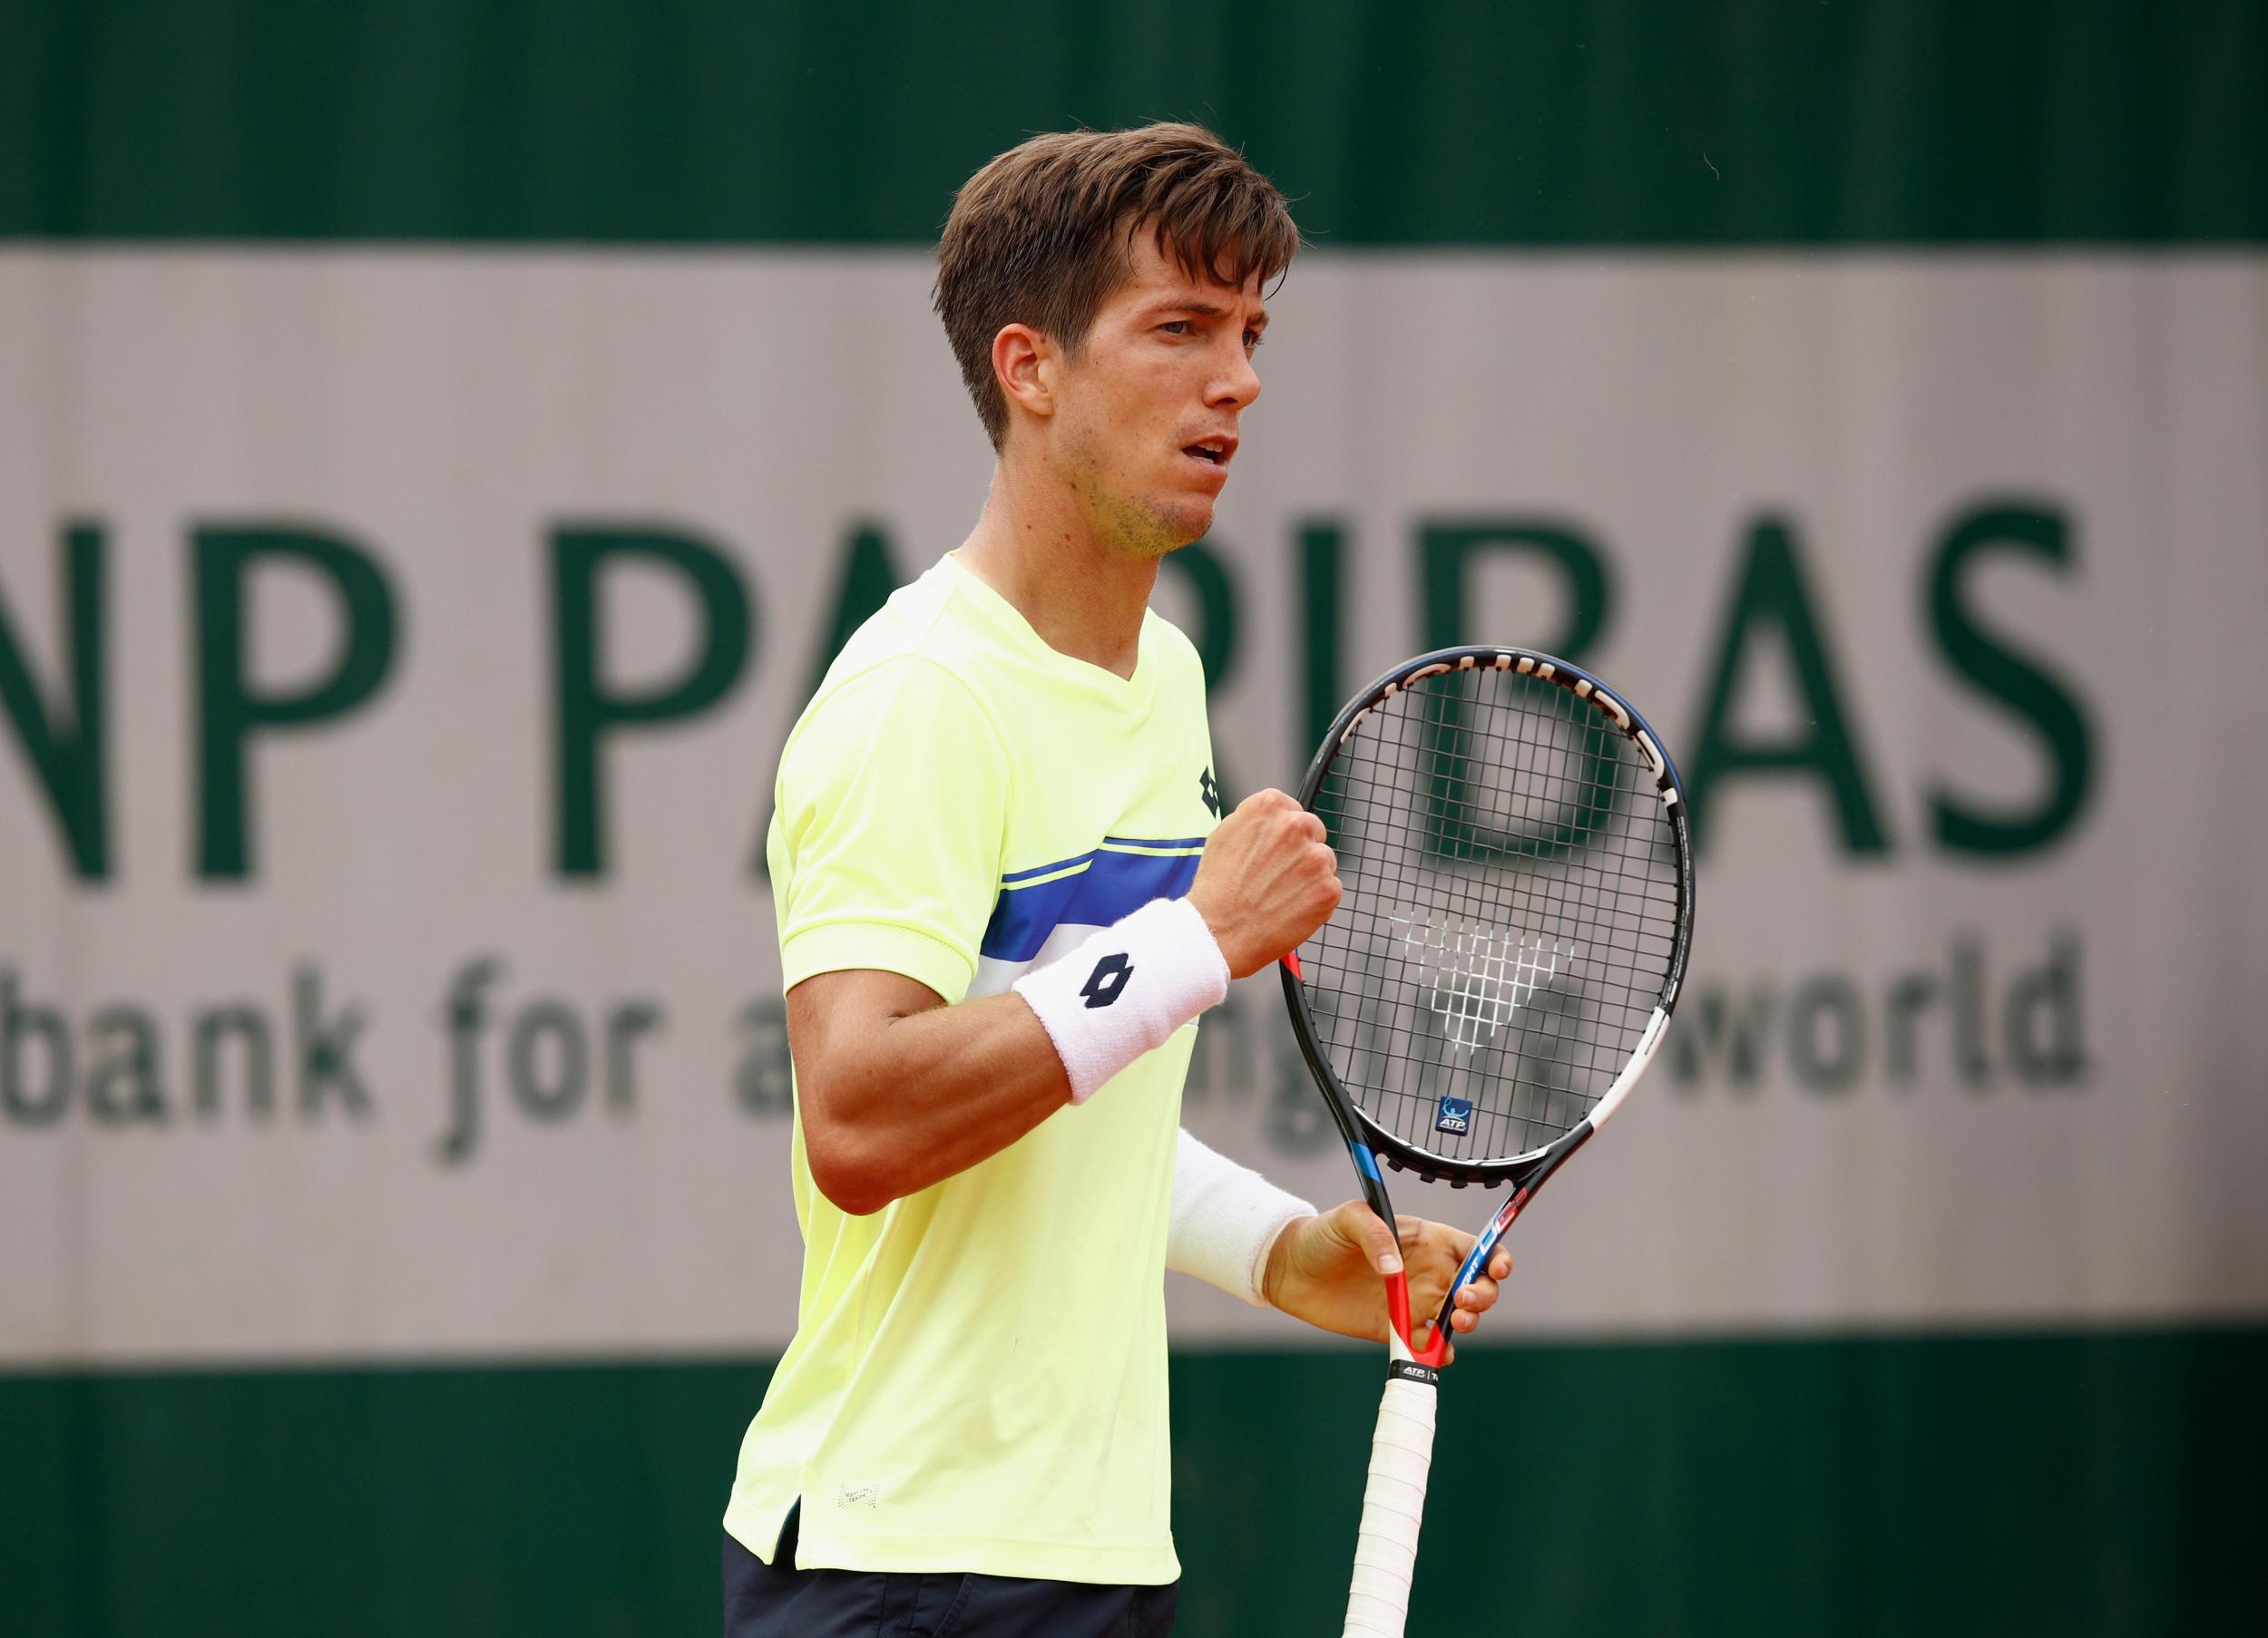 On Monday Bedene became the first British winner at this year's French Open